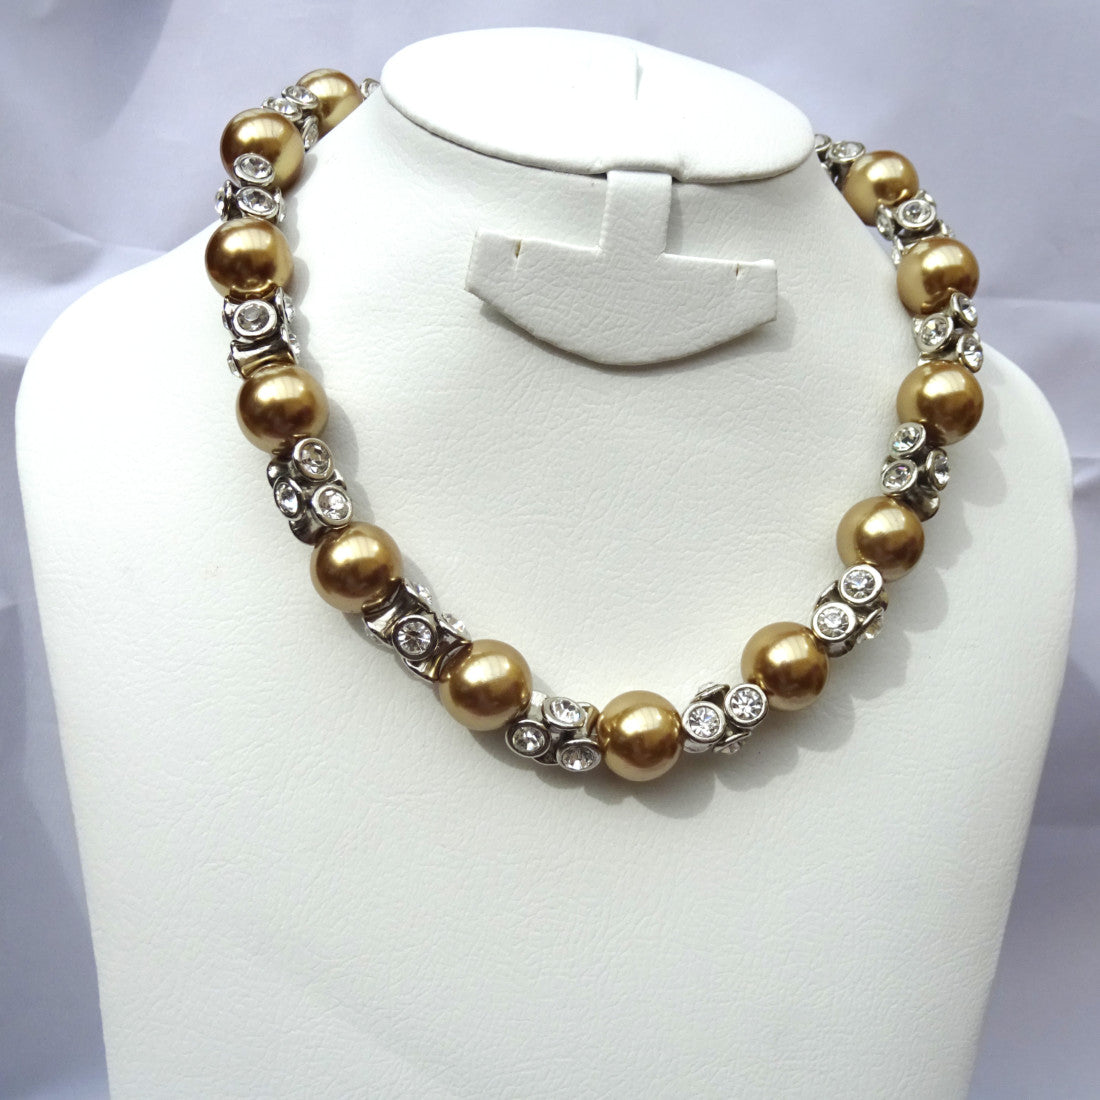 Light Weight Gold Beads Necklace Designs With Weight - YouTube